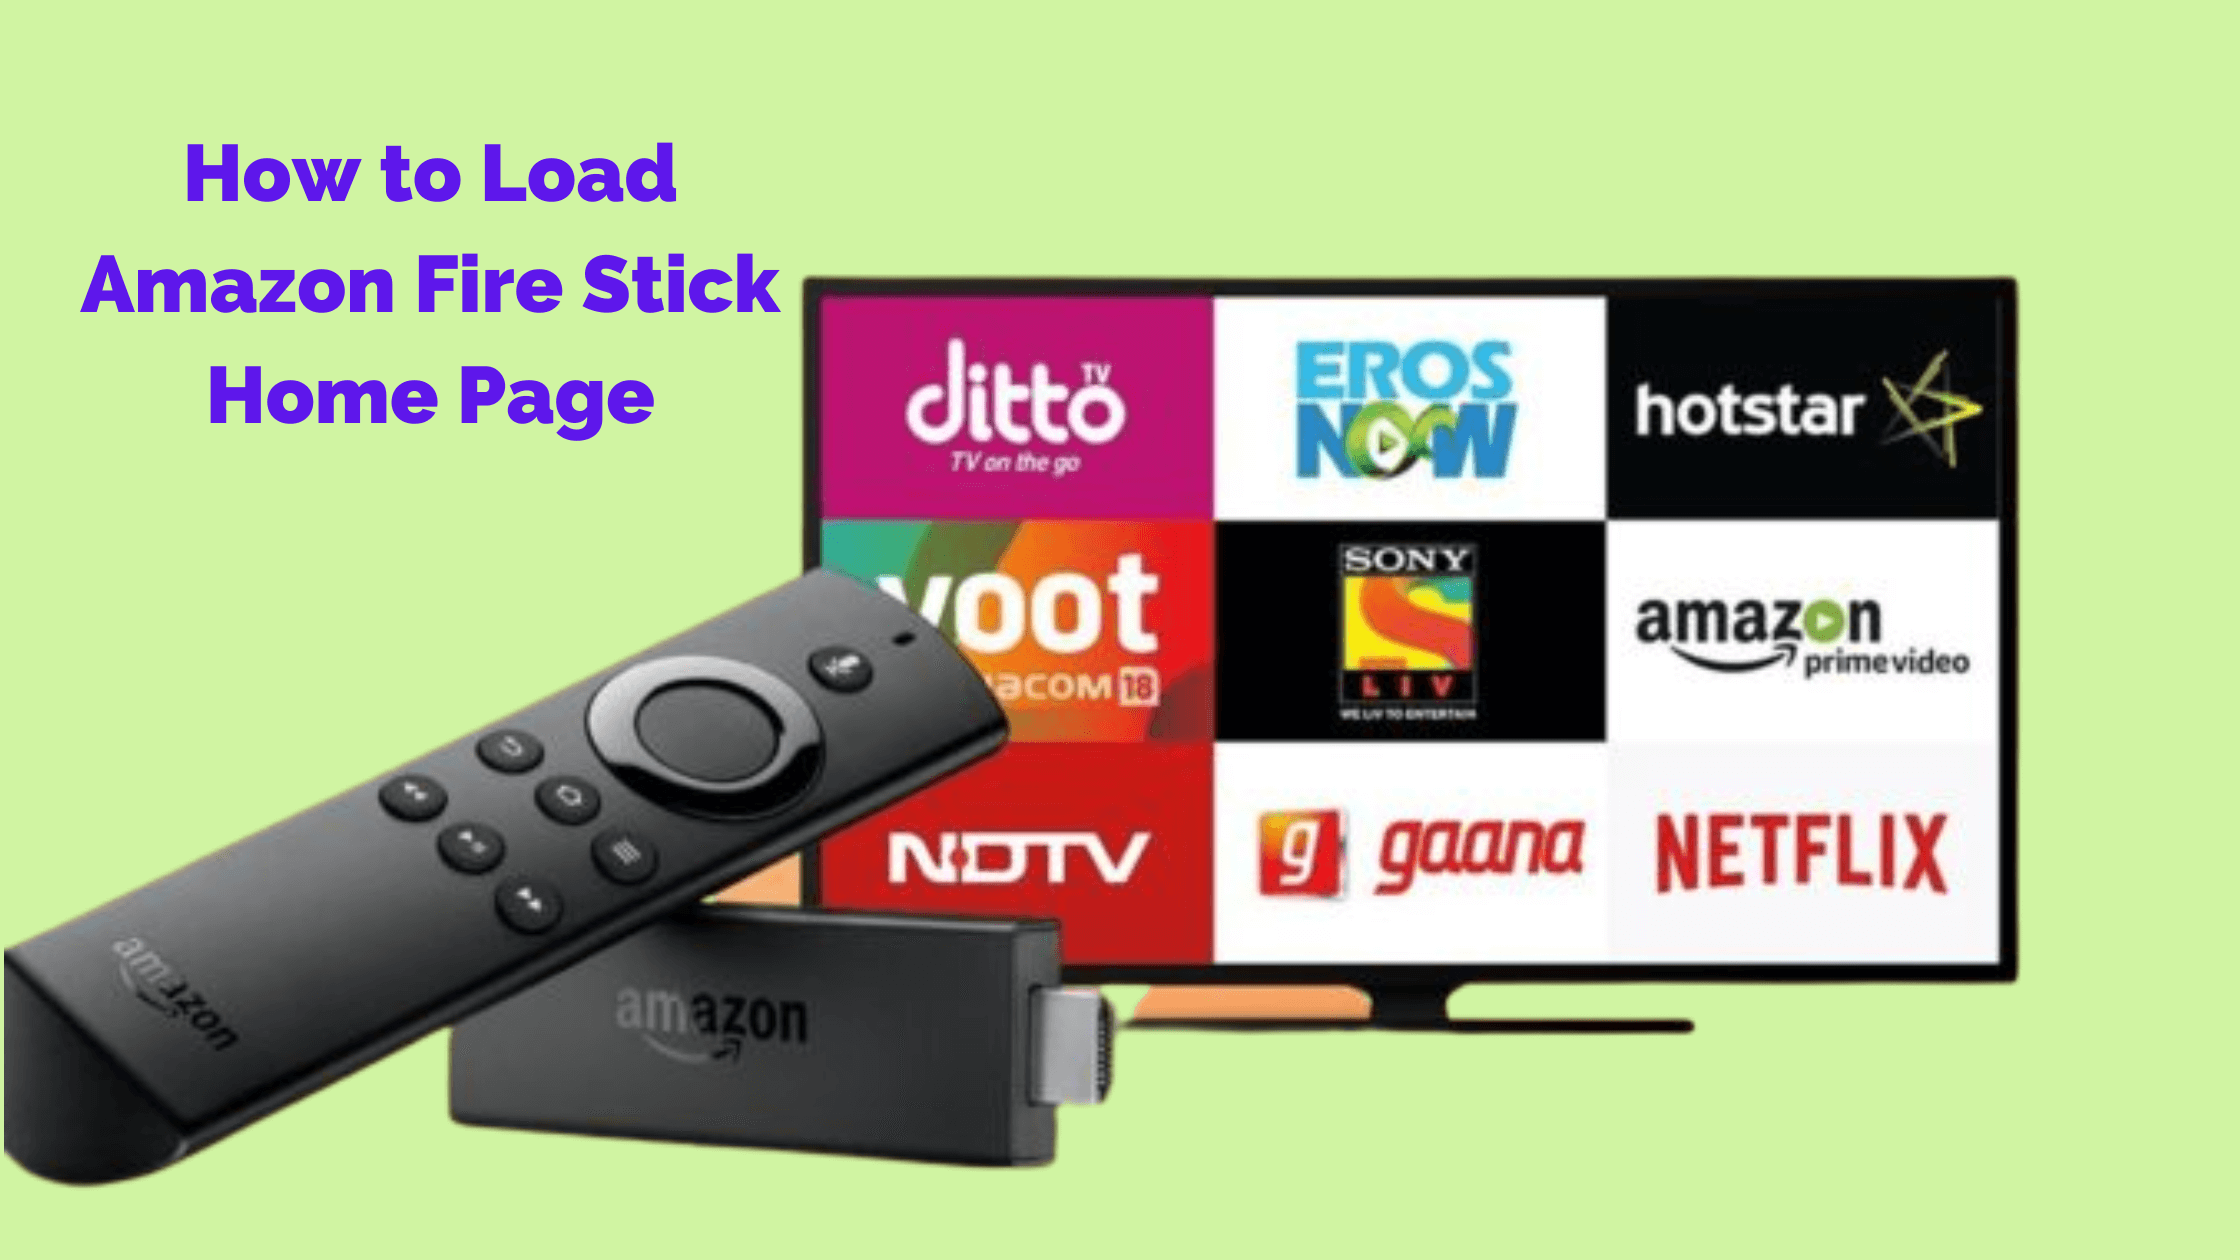 How to Load Amazon Fire Stick Home Page